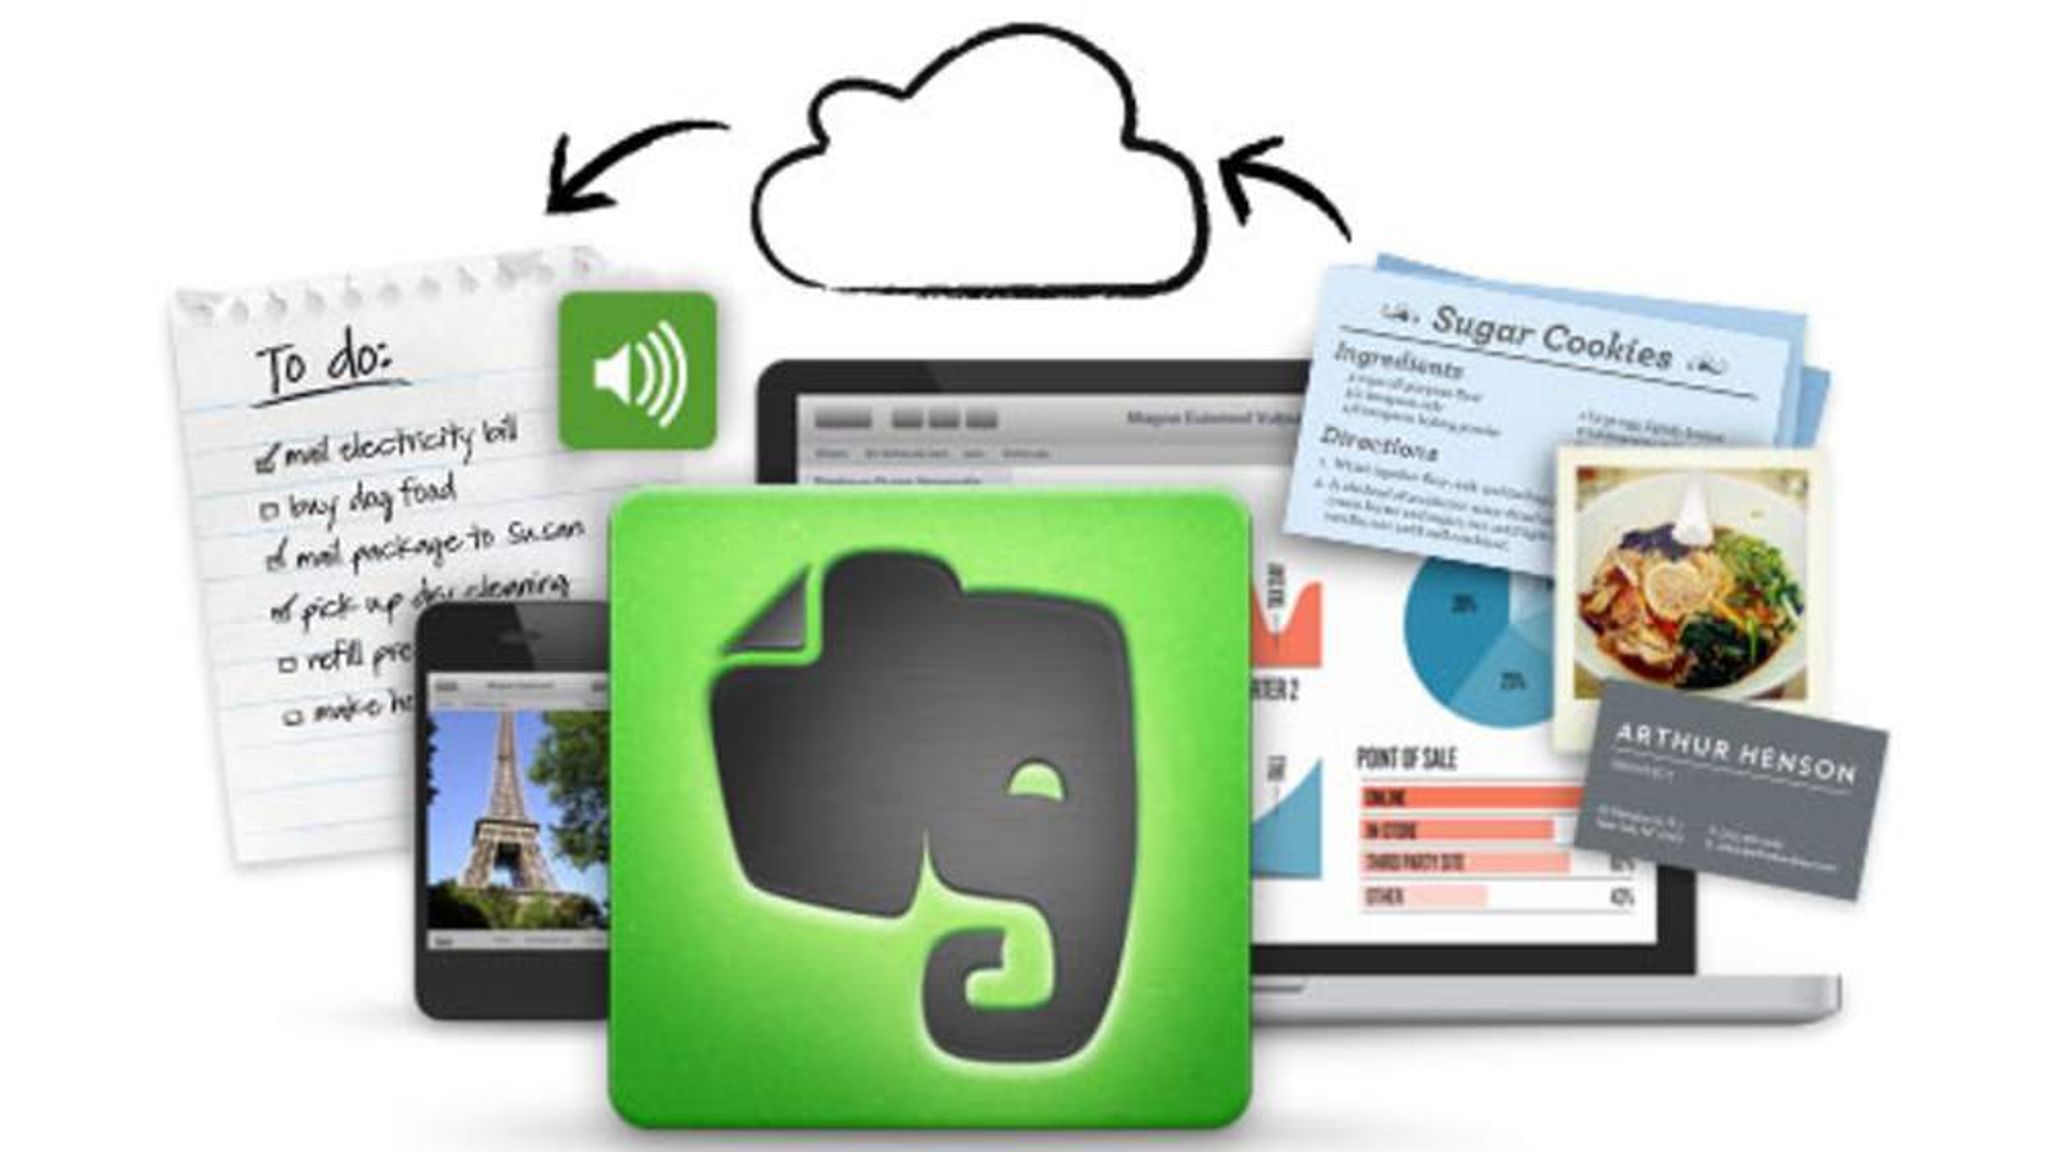 evernote hacked 2019